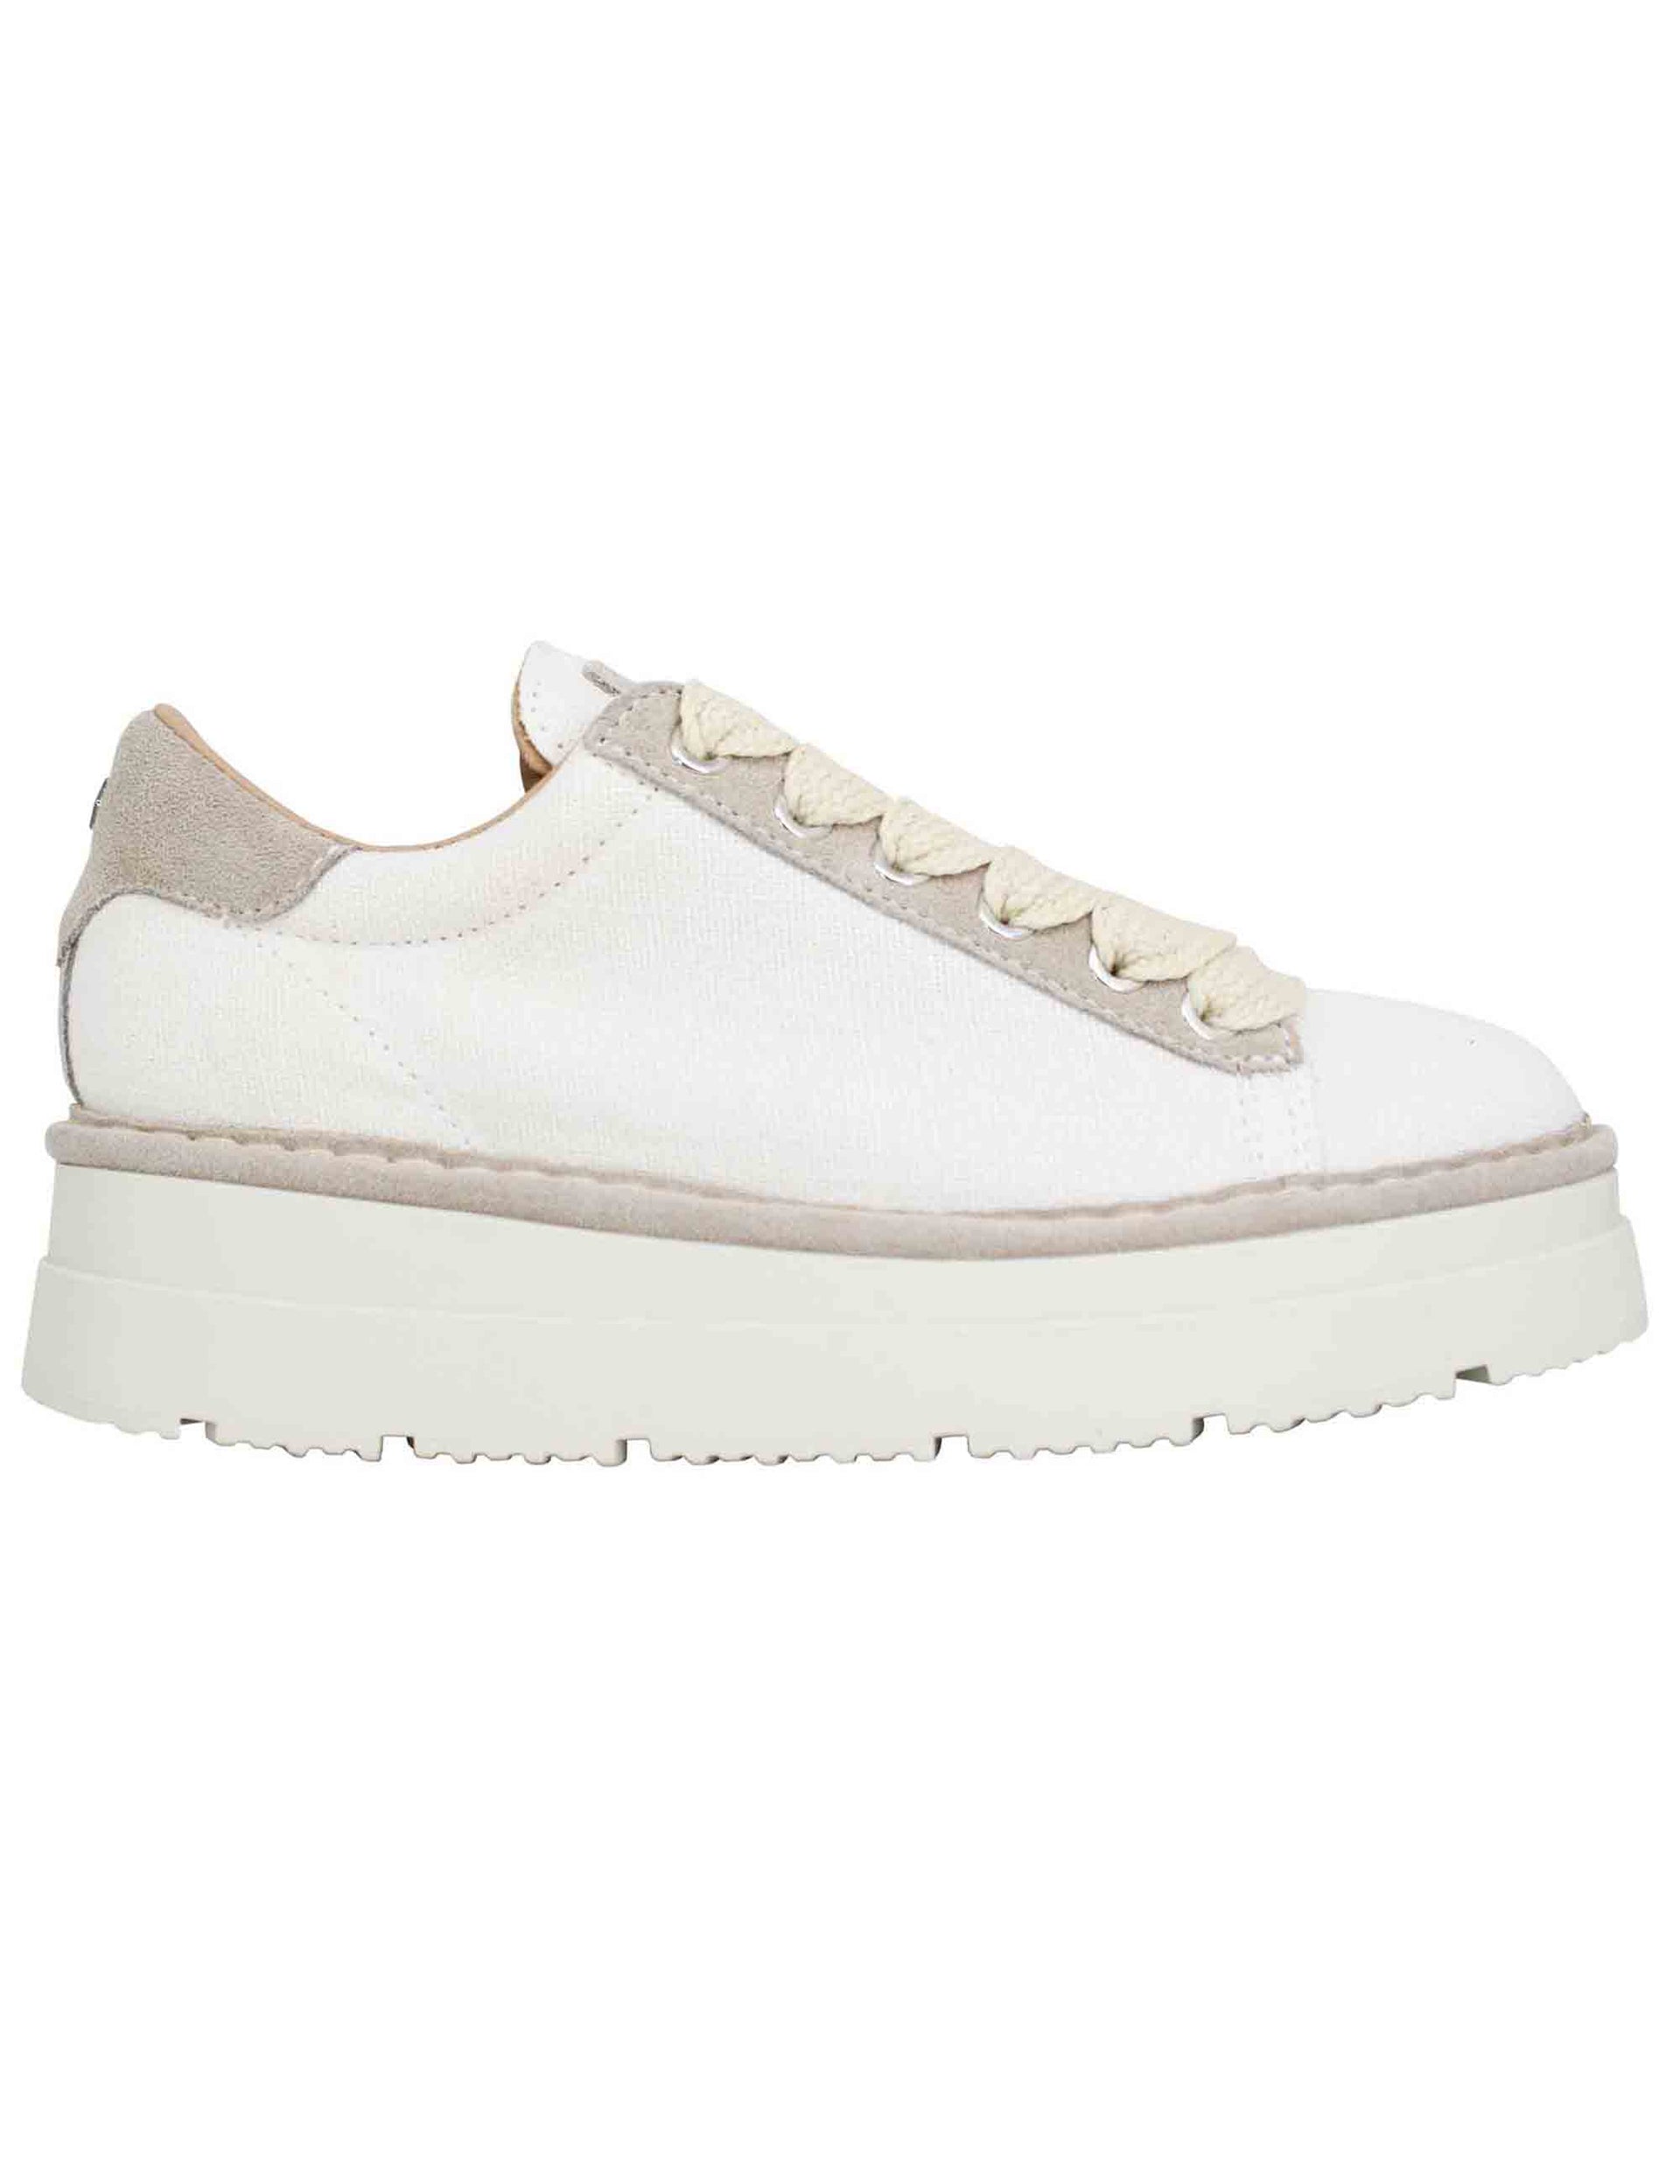 Women's sneakers in white fabric with high bottom